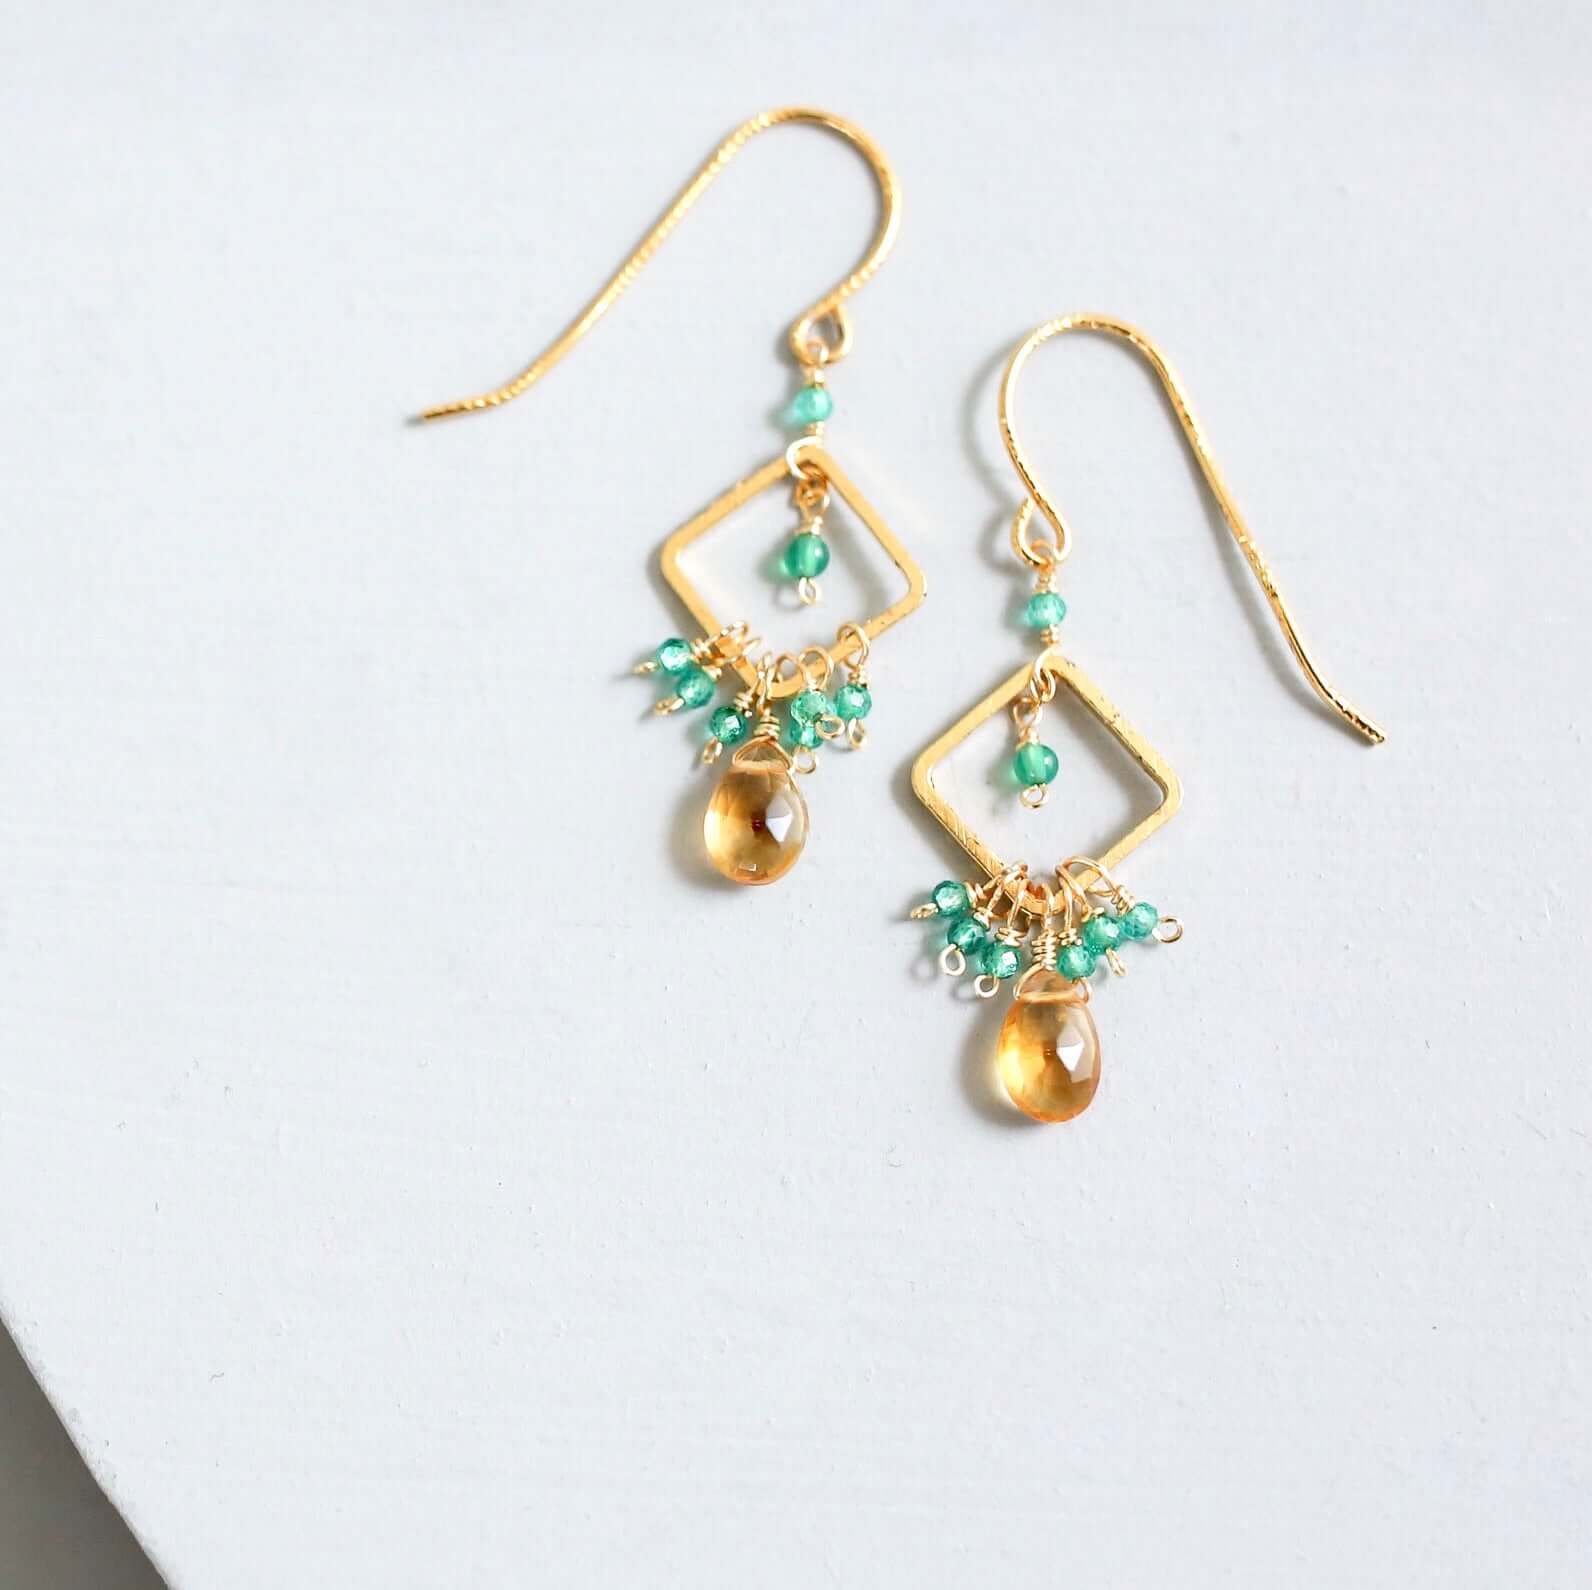  Citrine briolette gemstones with green onyx accent stones French Hook Gold Earrings 